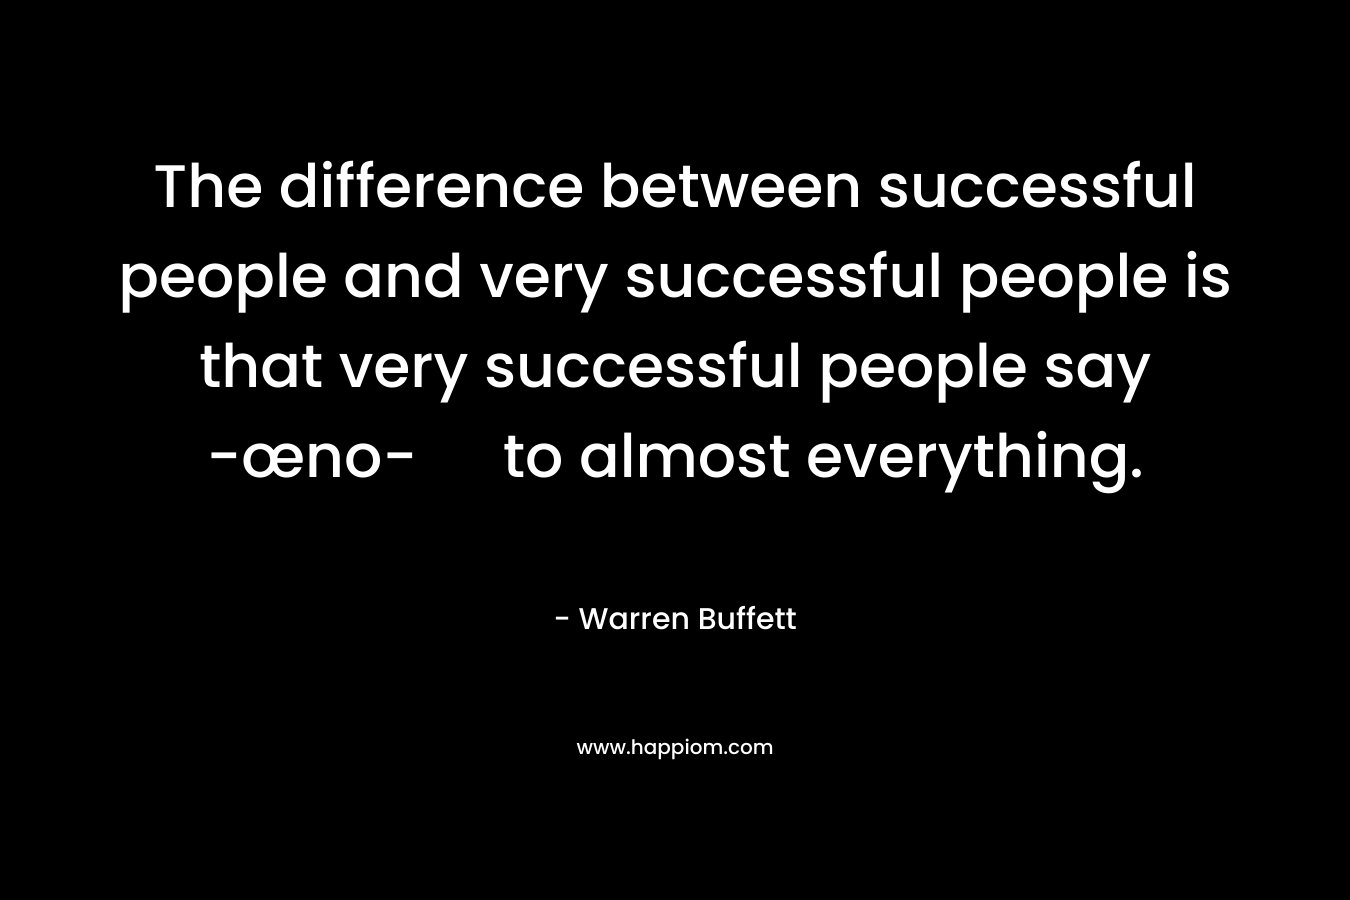 The difference between successful people and very successful people is that very successful people say -œno- to almost everything.